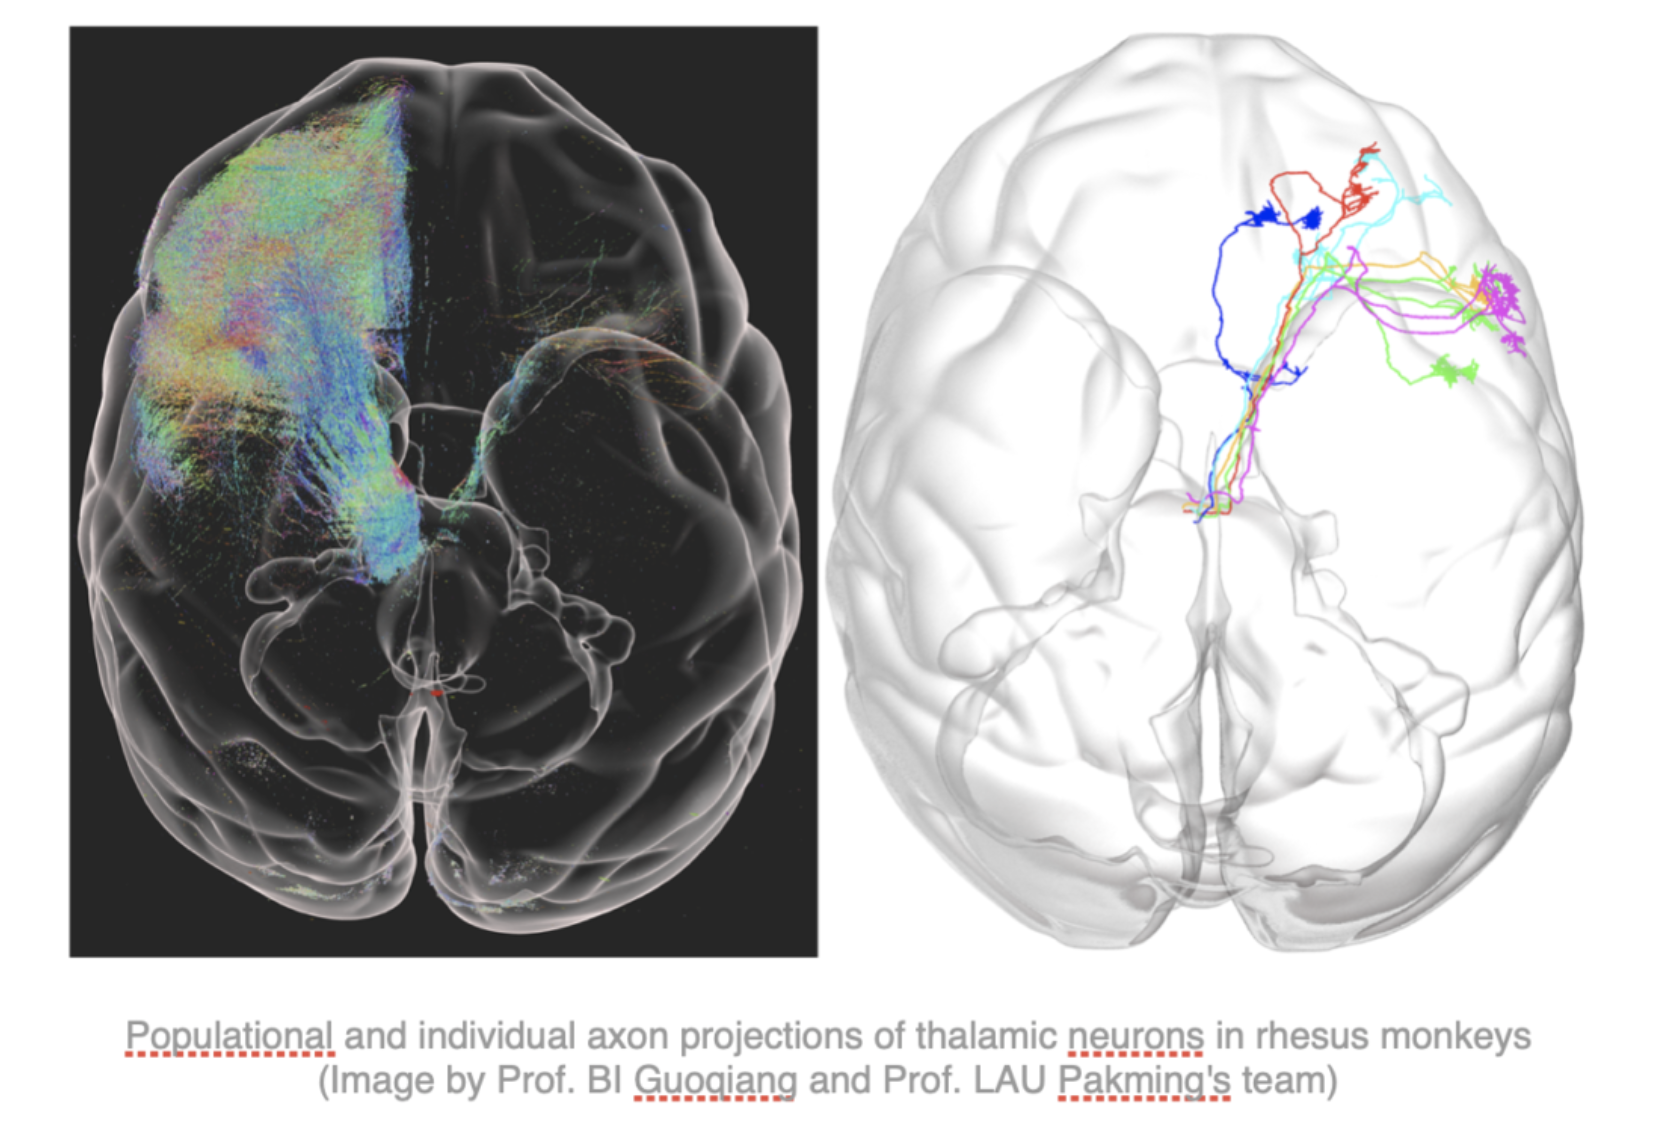 2021/07 Chinese researchers achieve brain map of macaque monkey in micron resolution